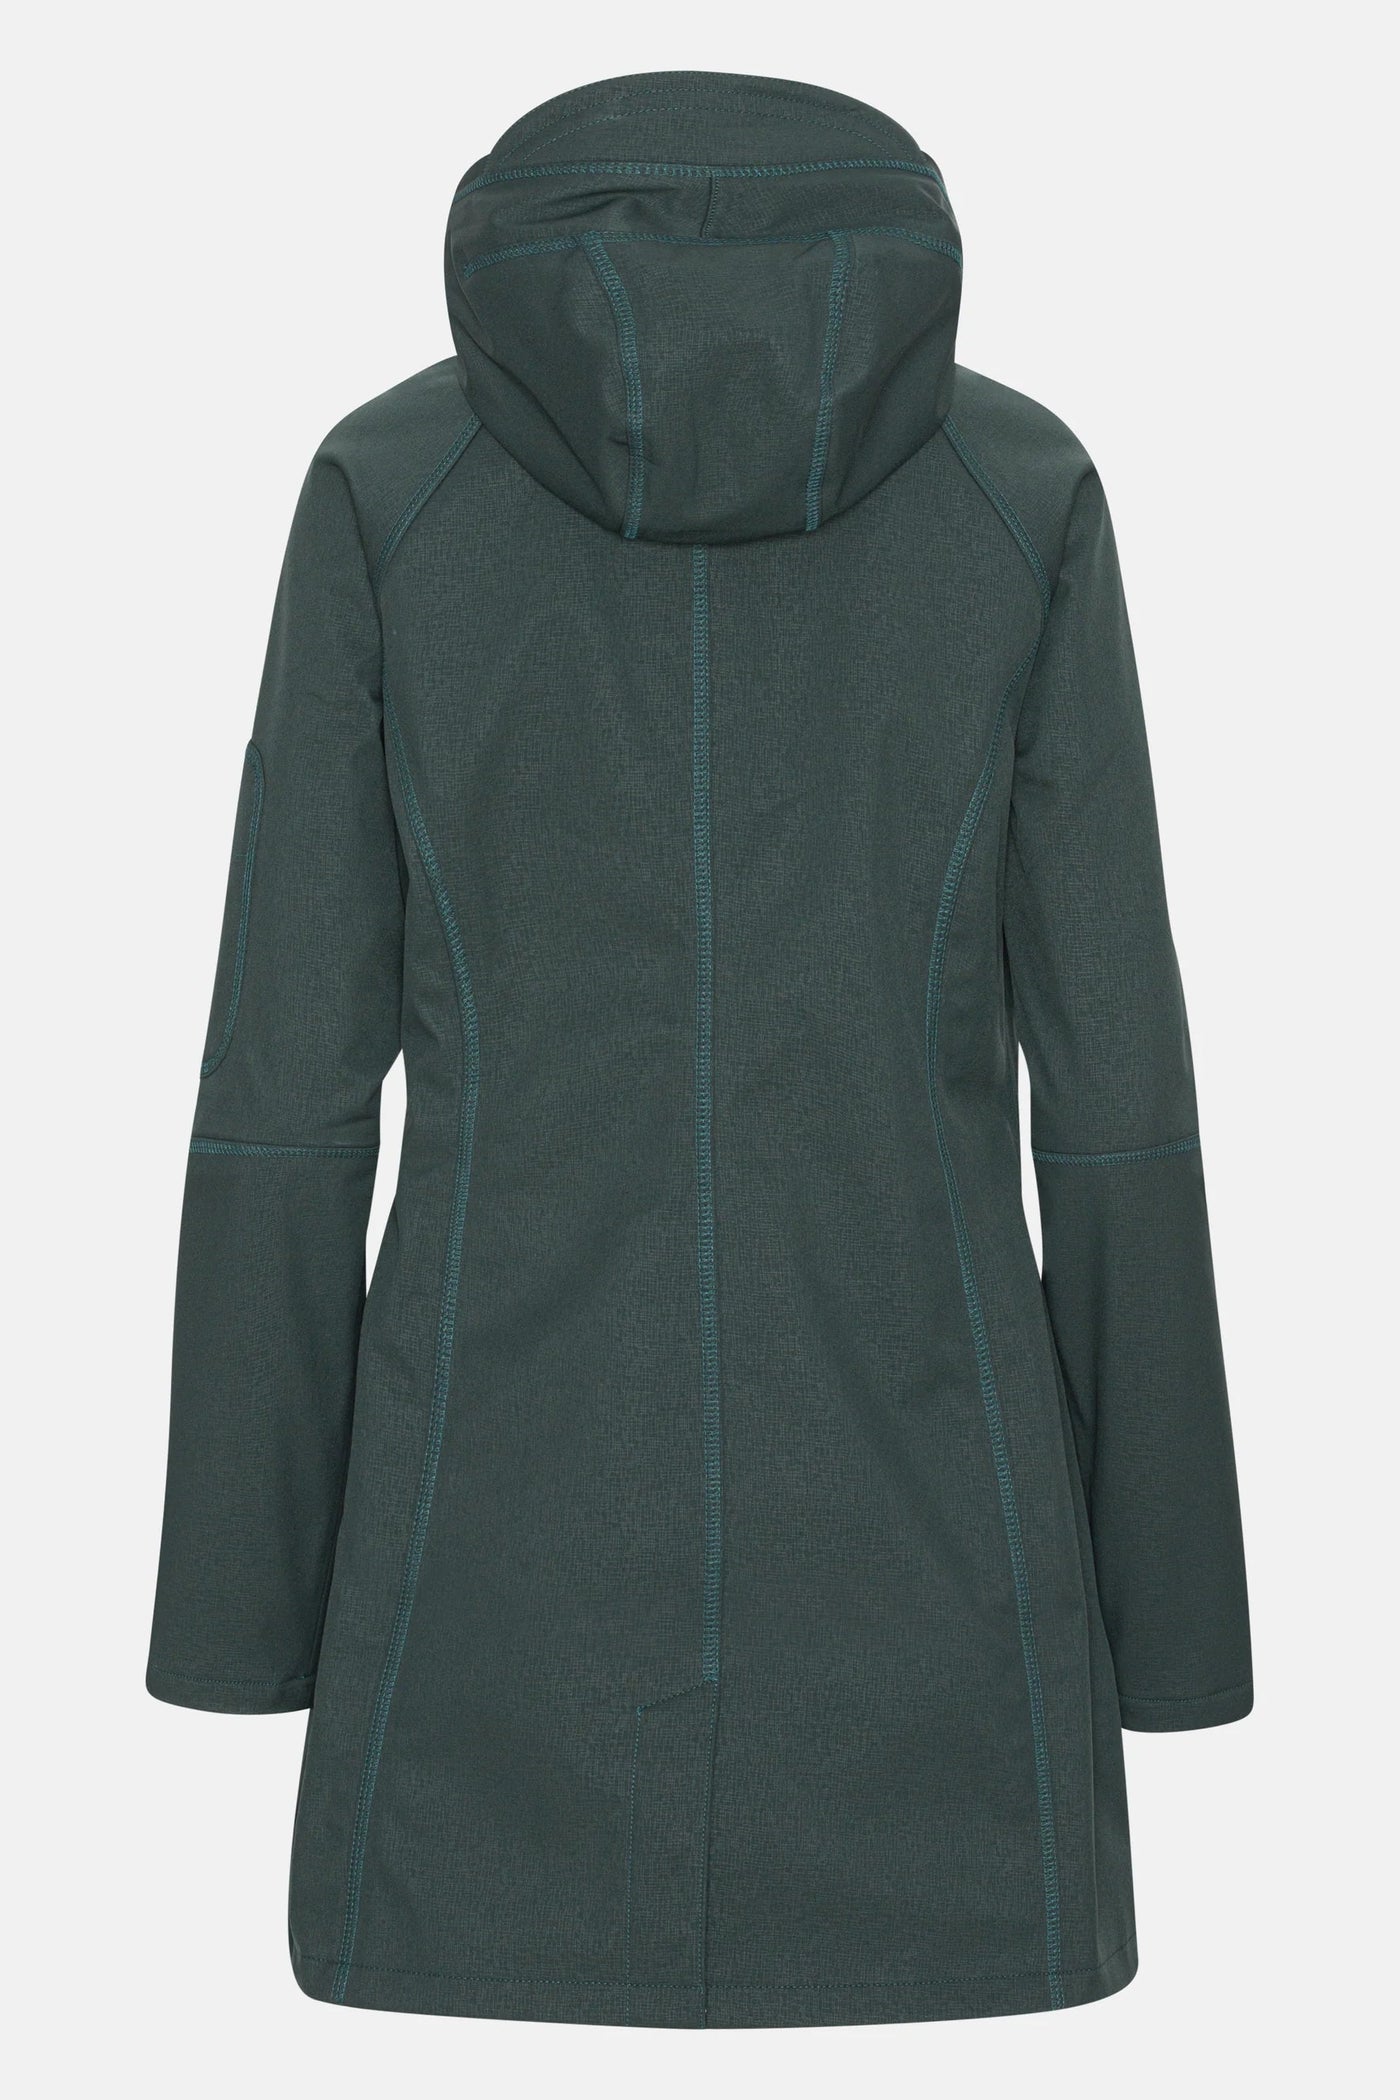 Ilse Jacobsen Rain37 in Beetle-Womens-Ohh! By Gum - Shop Sustainable